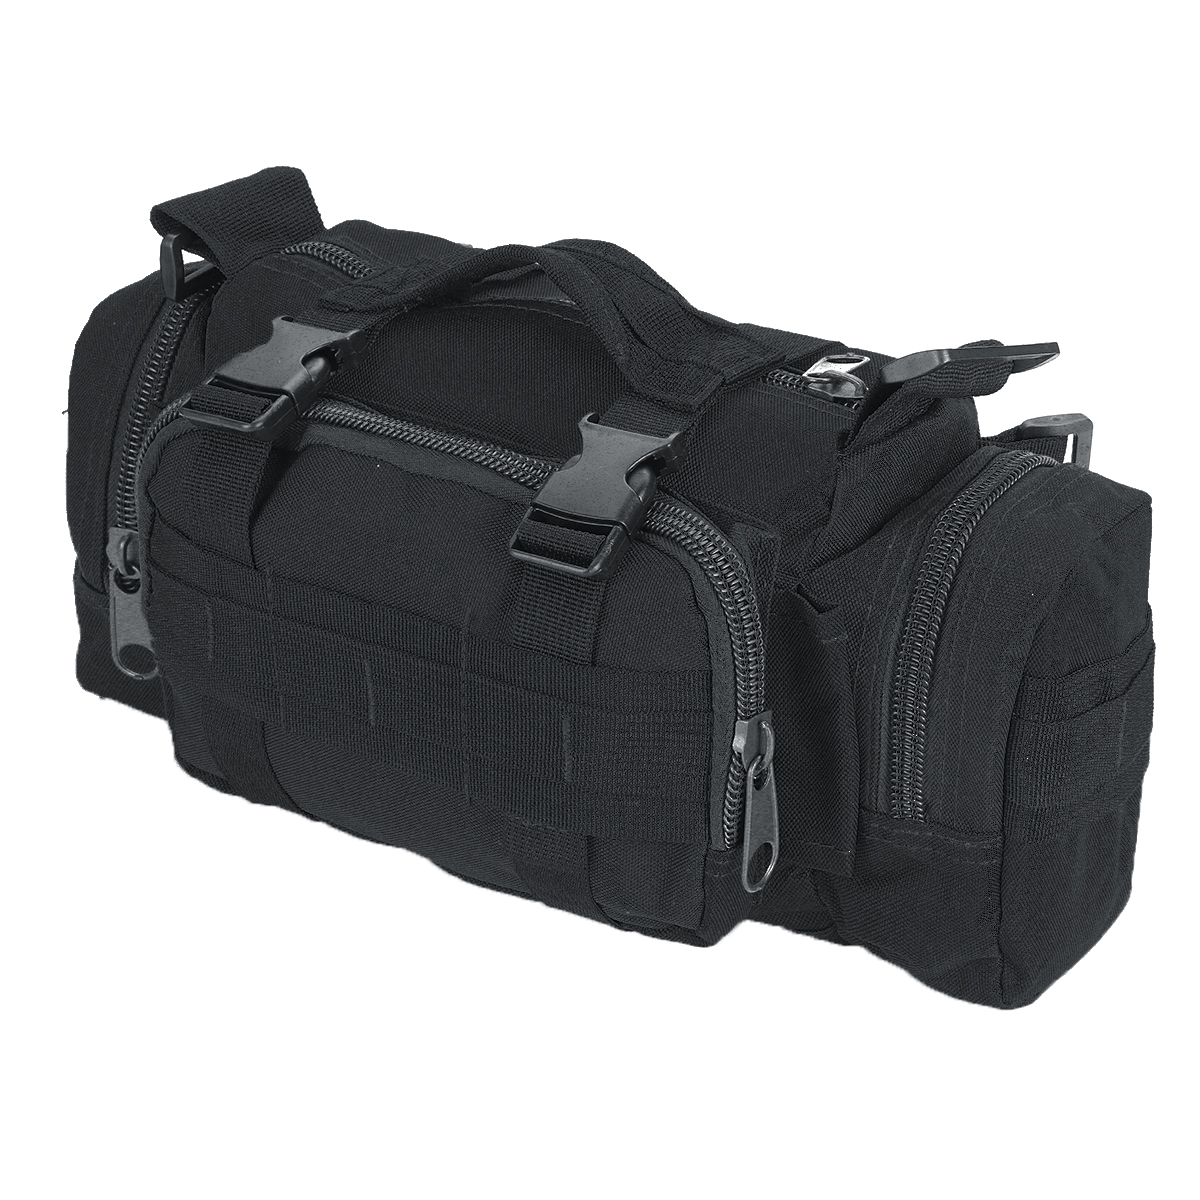 Multifunctional-Outdoor-Sports-Hiking-with-Zippers-Nylon-Oxford-Cloth-Tactical-Shoulder-Bag-Waist-Pa-1825563-7